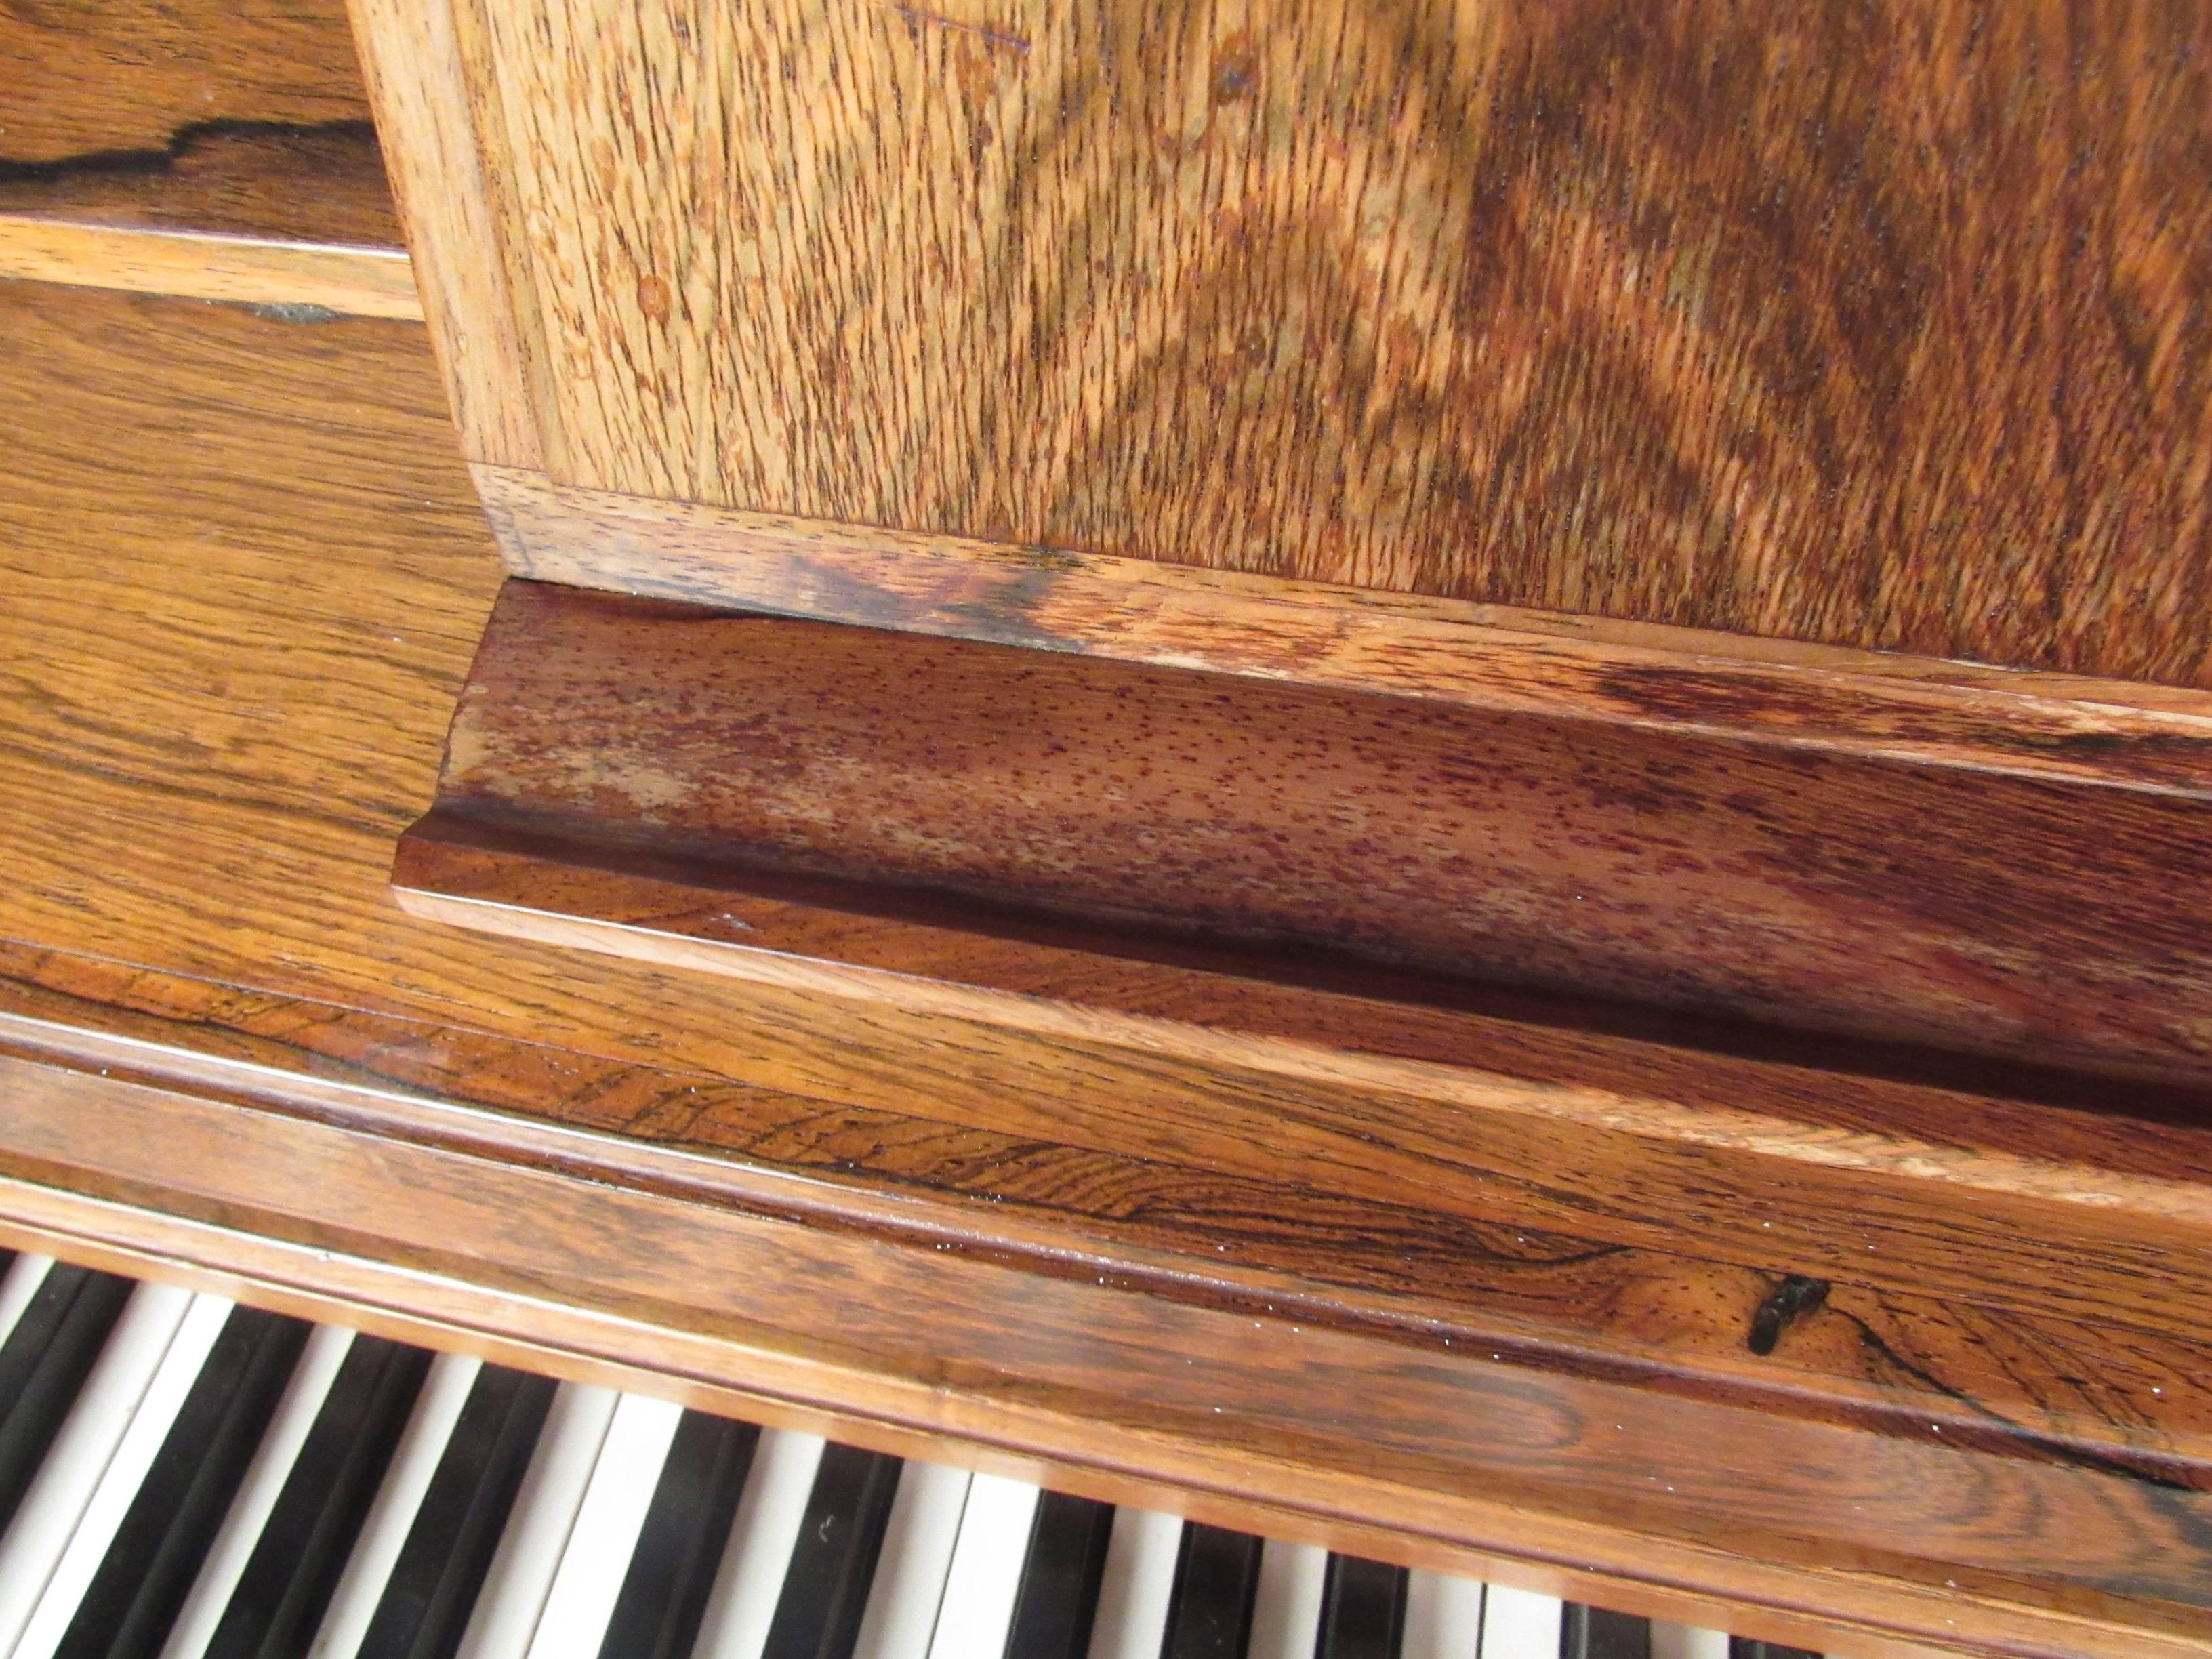 American Exquisite Midcentury Rosewood Piano by Kimball